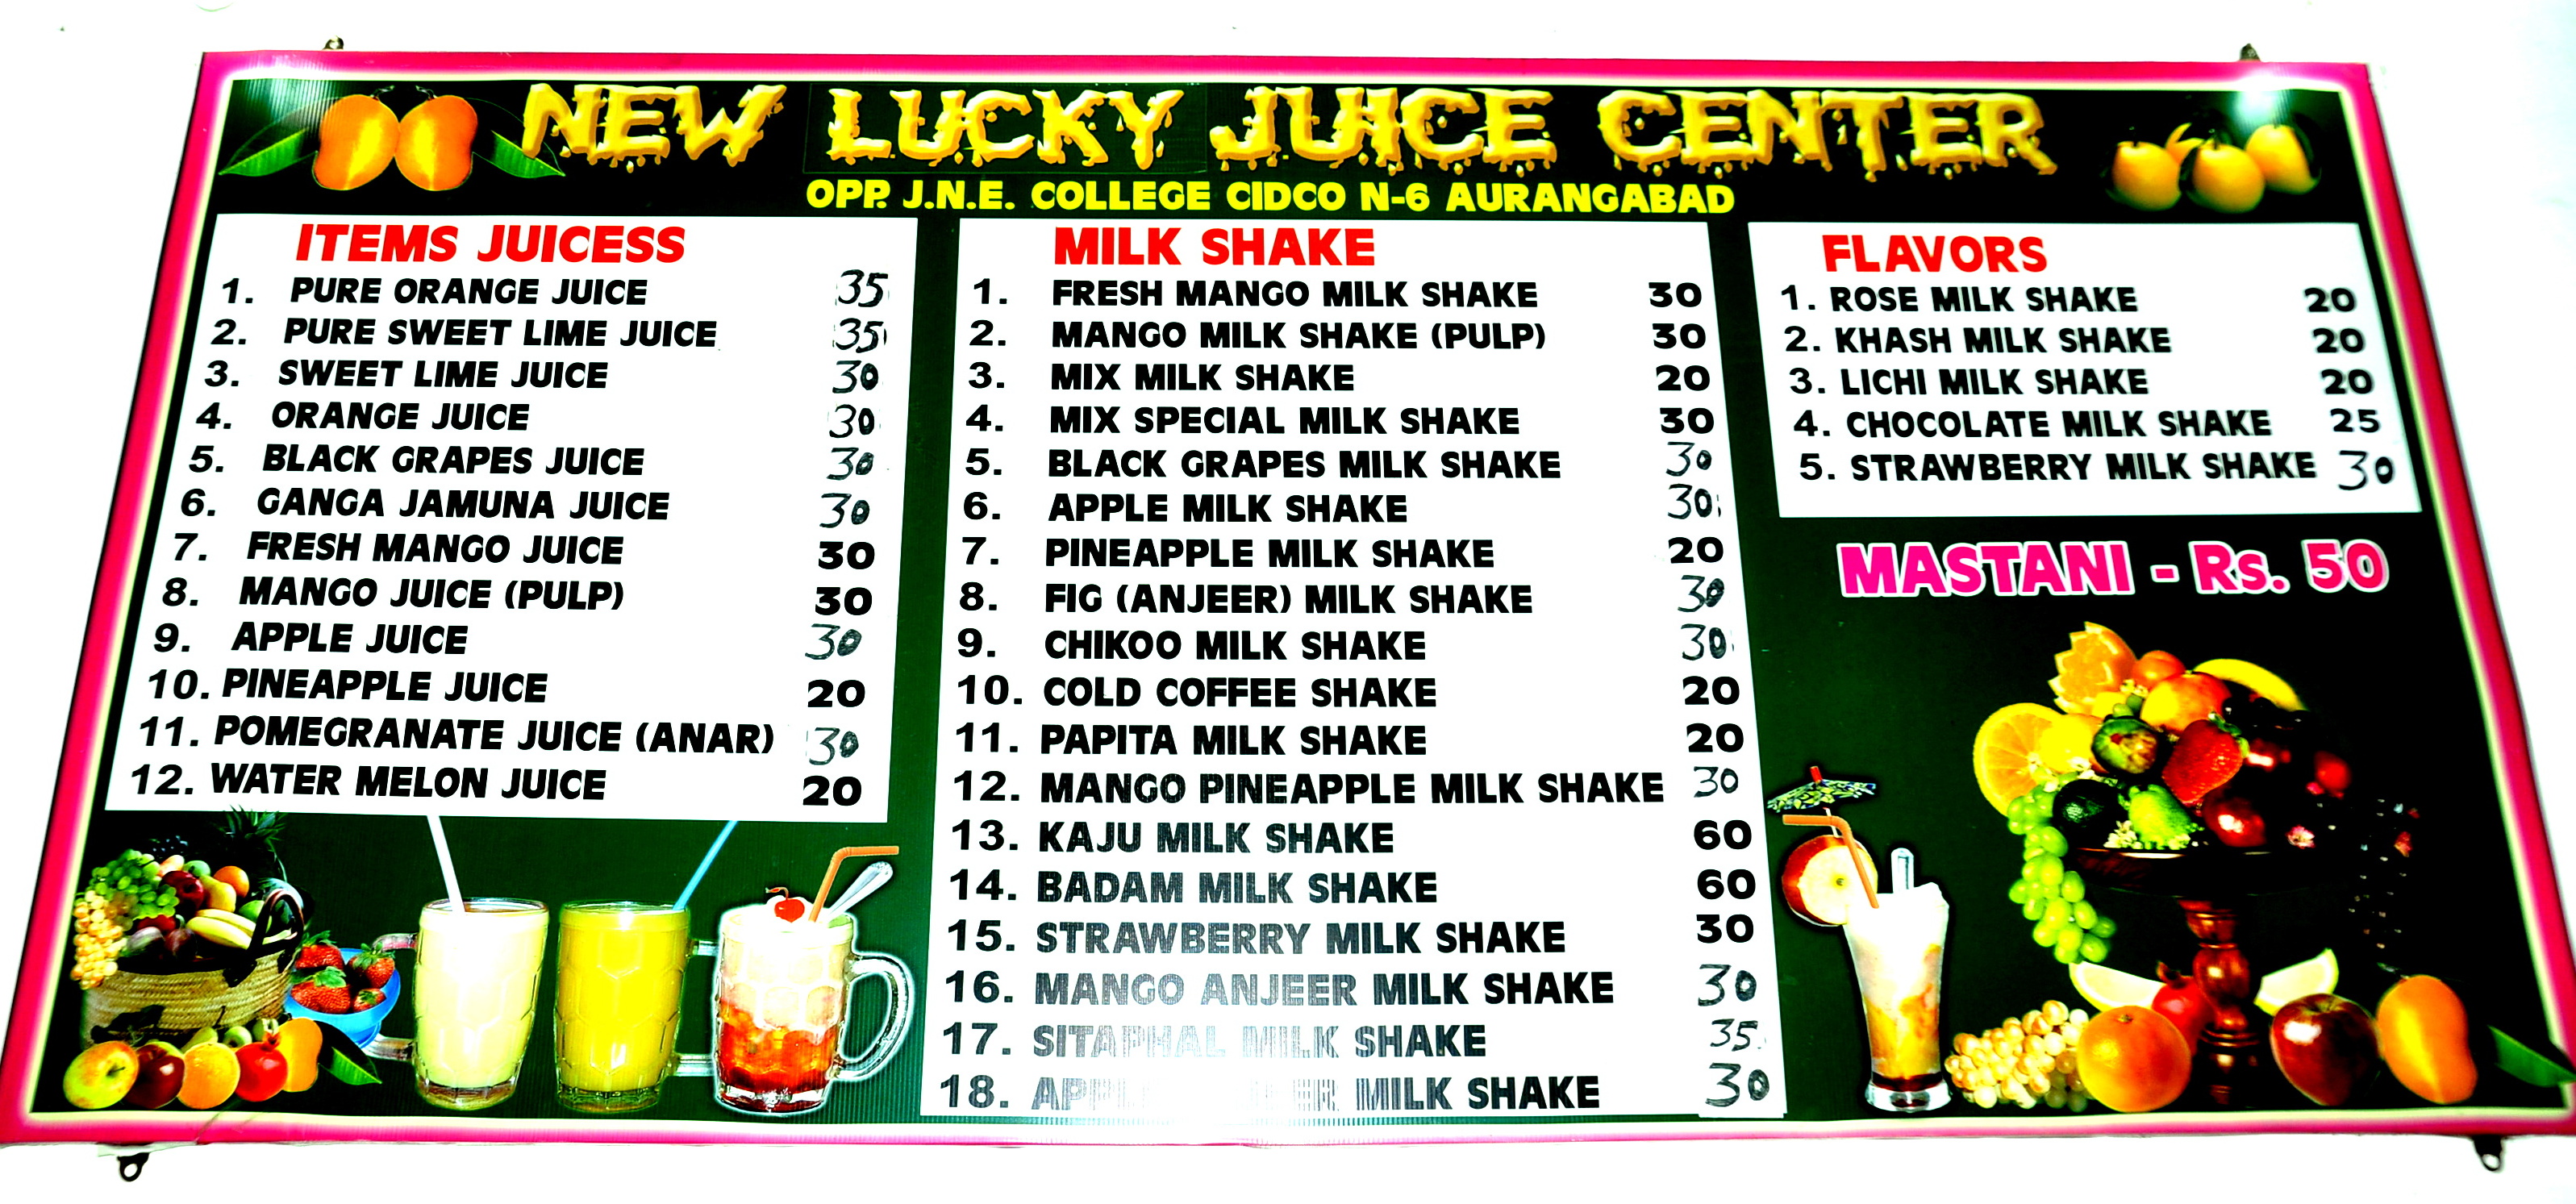 The elaborate menu on the walls of New Lucky Juice Center